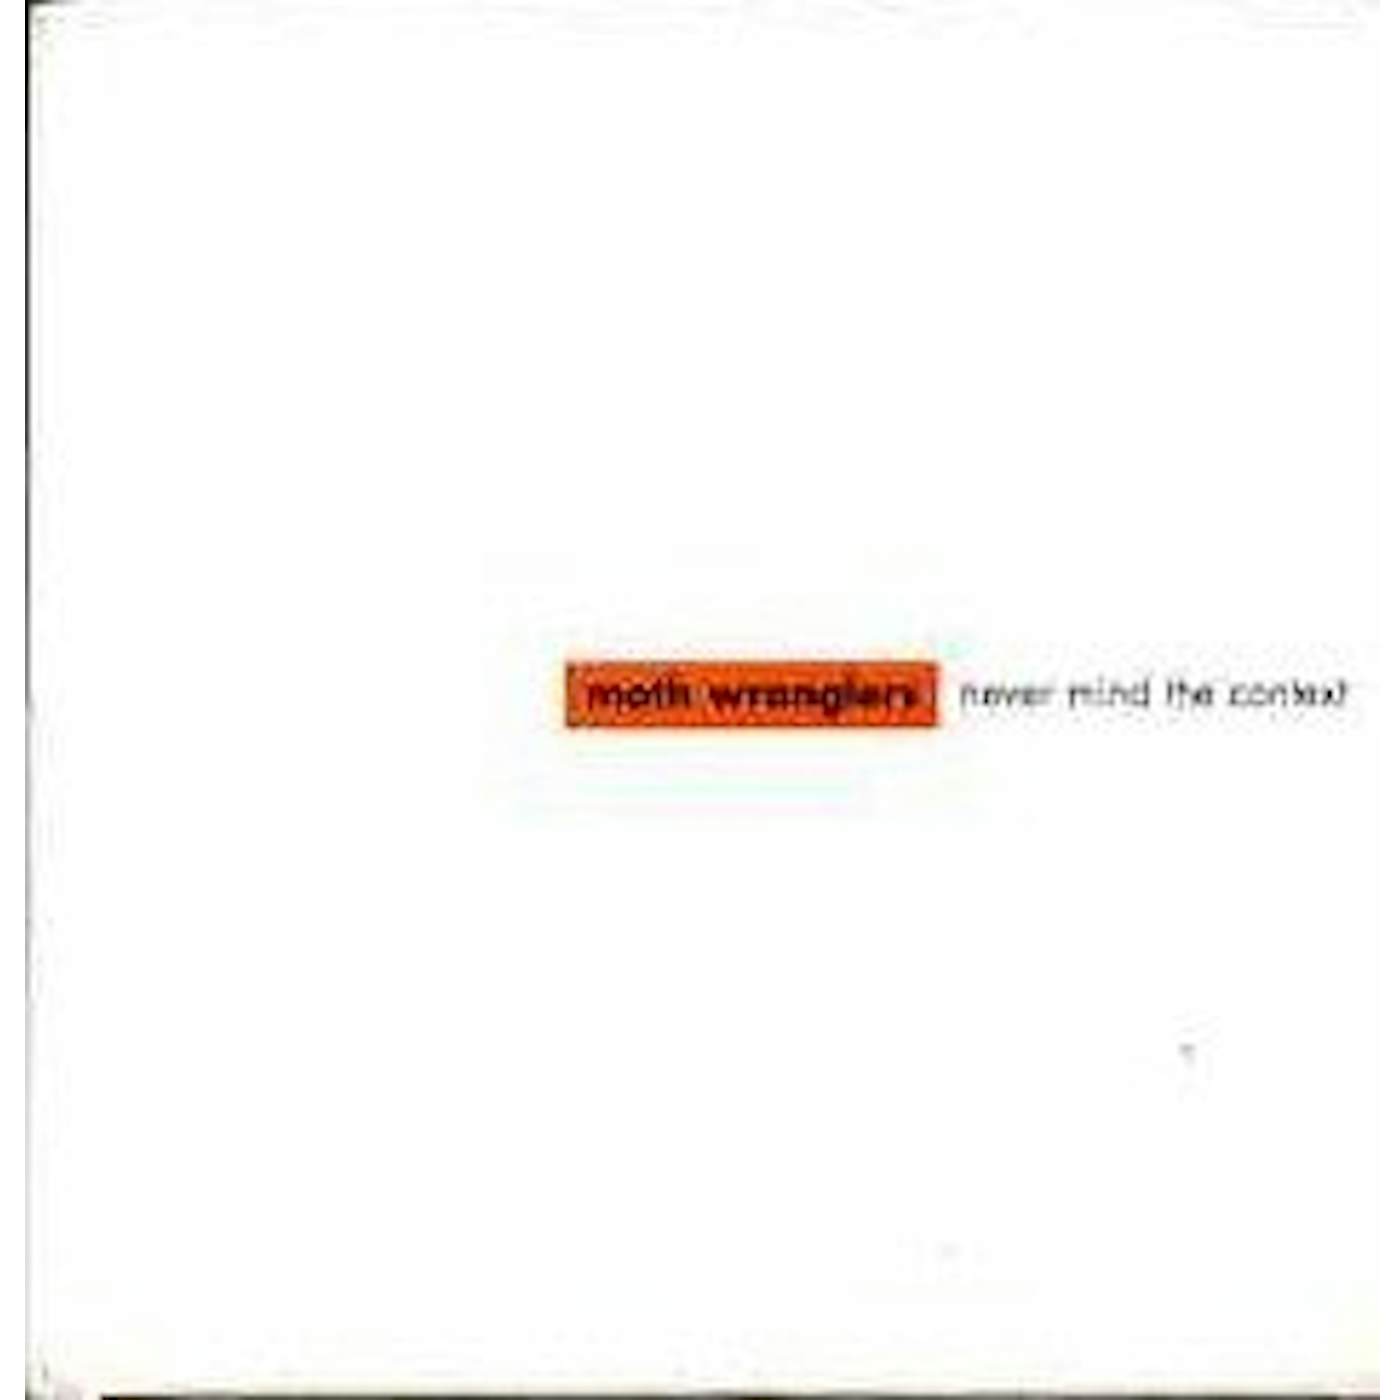 Moth Wranglers NEVER MIND THE CONTEXT CD